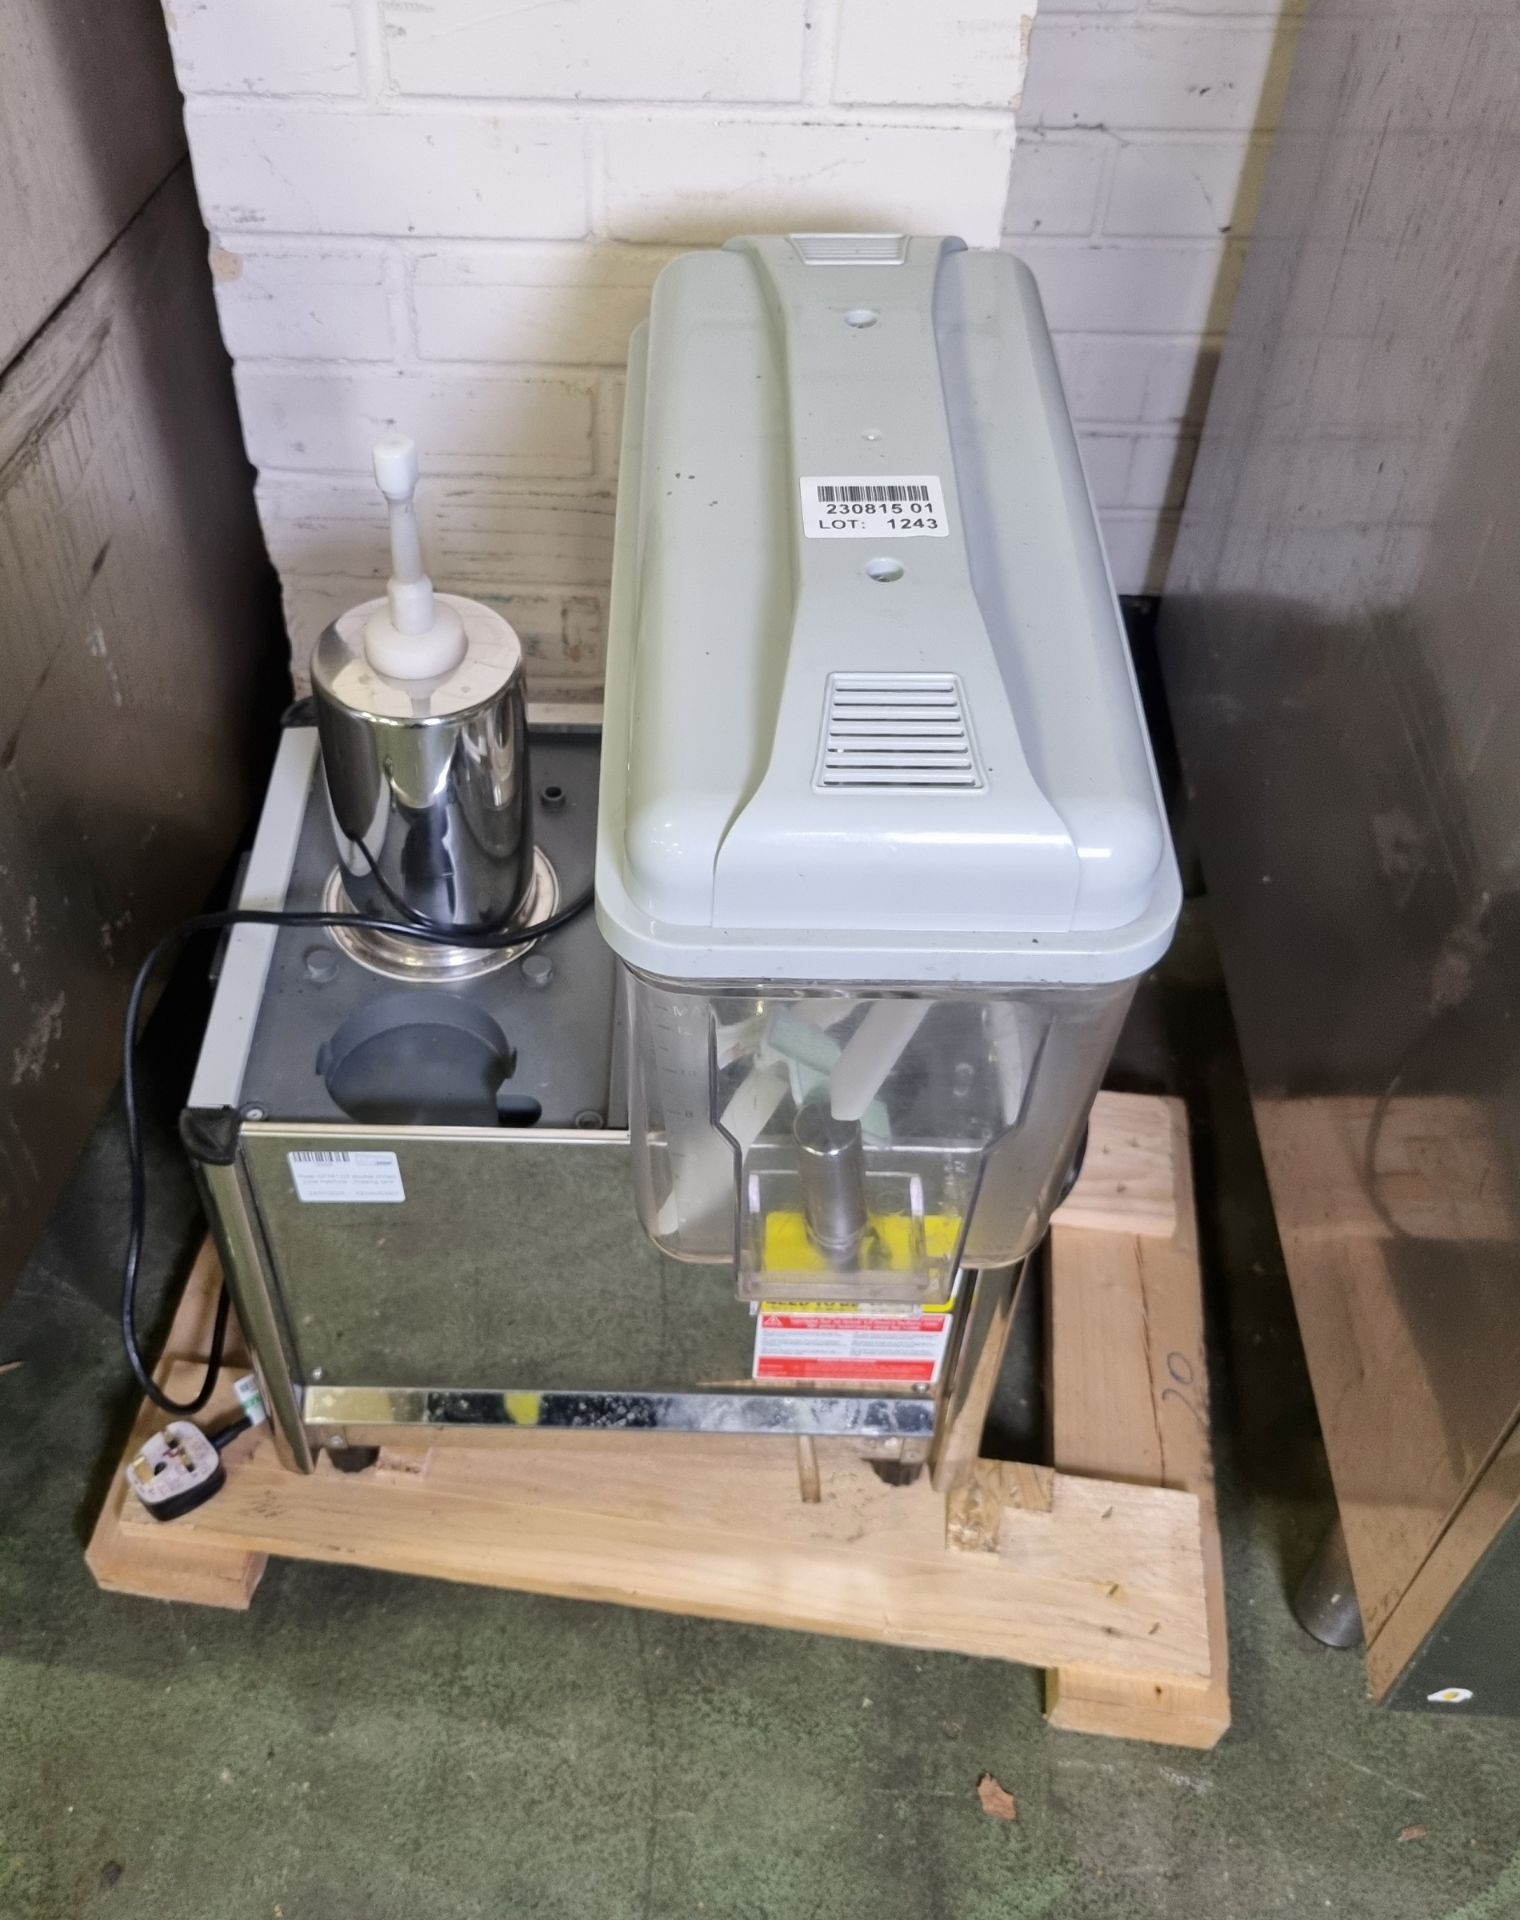 Polar CF761-03 double chilled juice machine - missing tank - Image 2 of 5